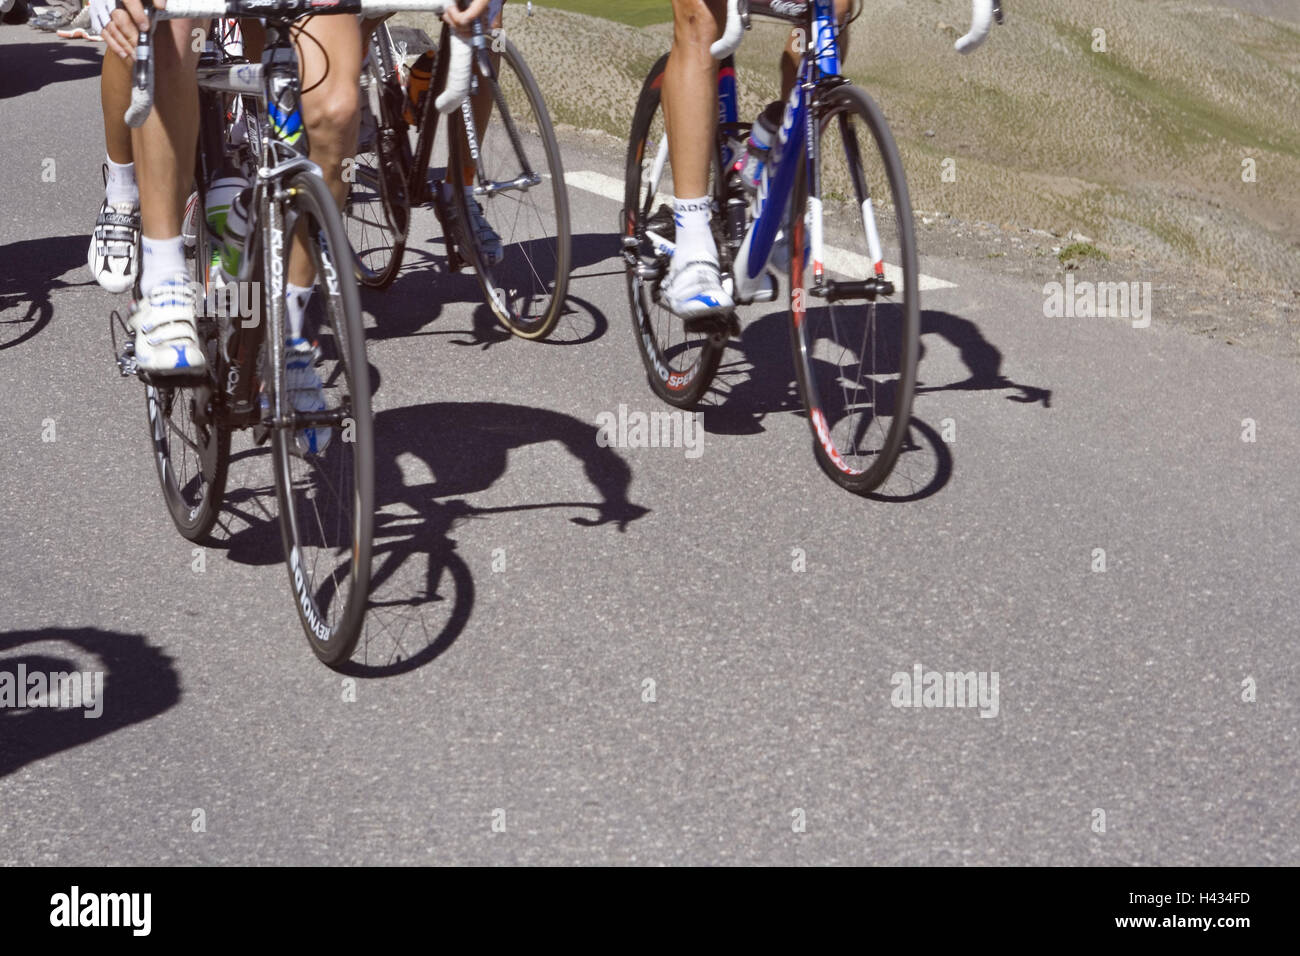 Street, racing cyclist, go, uphill, detail, no model release, France, racing wheels, bicycles, cycling, sport, bicycle driving, motion, feet, bicycle shoes, radian shoes, step, strain, hobby, leisure time, perseverance, condition, person, group, nature, sunshine, shade, Stock Photo